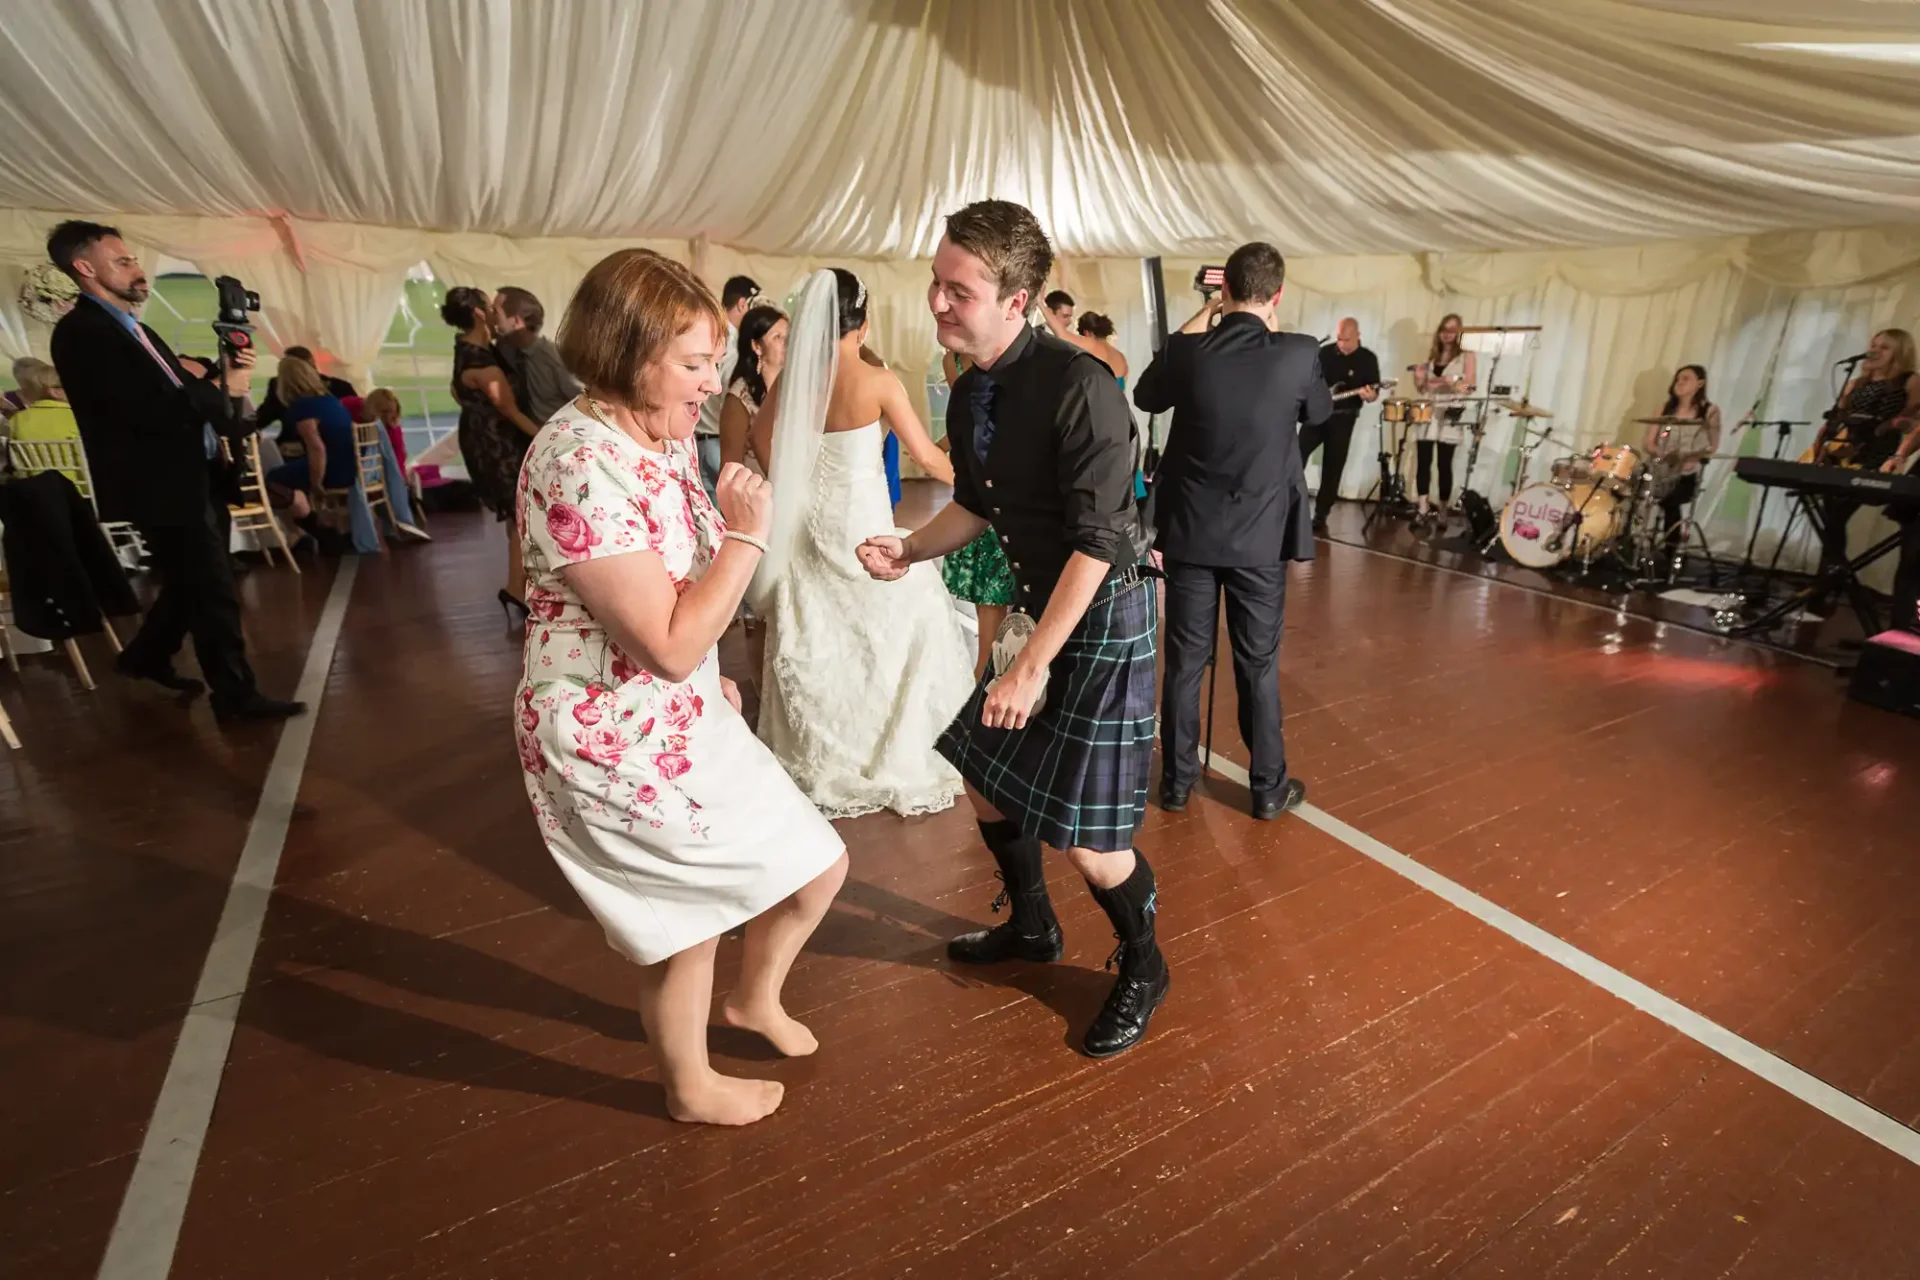 A man in a kilt dances with a woman in a floral dress at a lively wedding reception inside a marquee, with guests and a live band in the background.